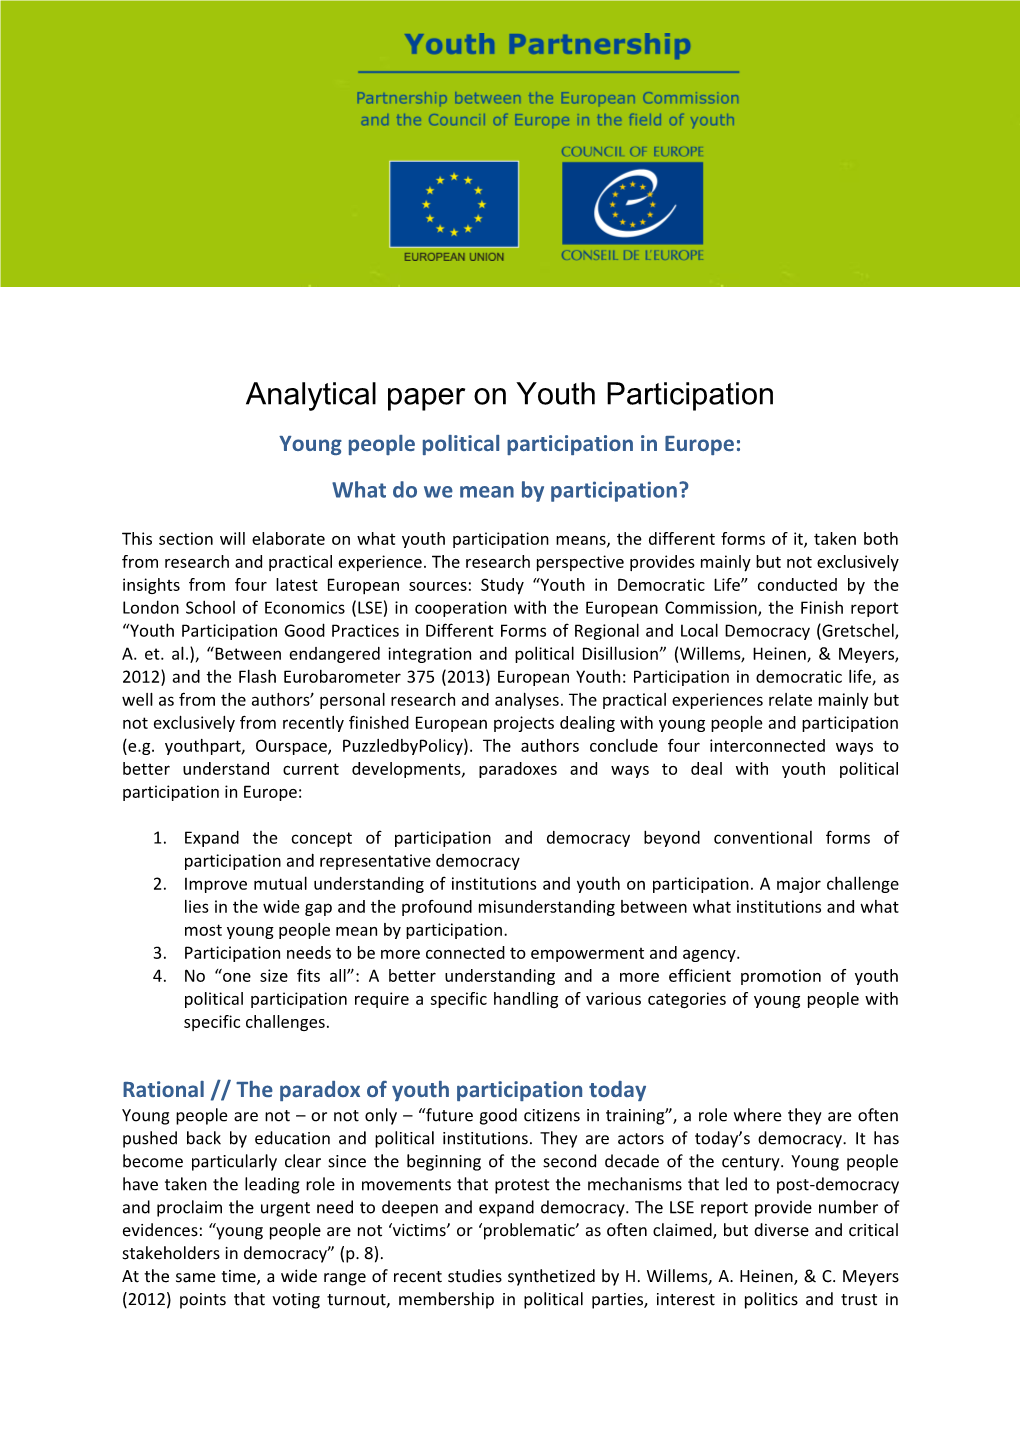 Analytical Paper on Youth Participation Young People Political Participation in Europe: What Do We Mean by Participation?